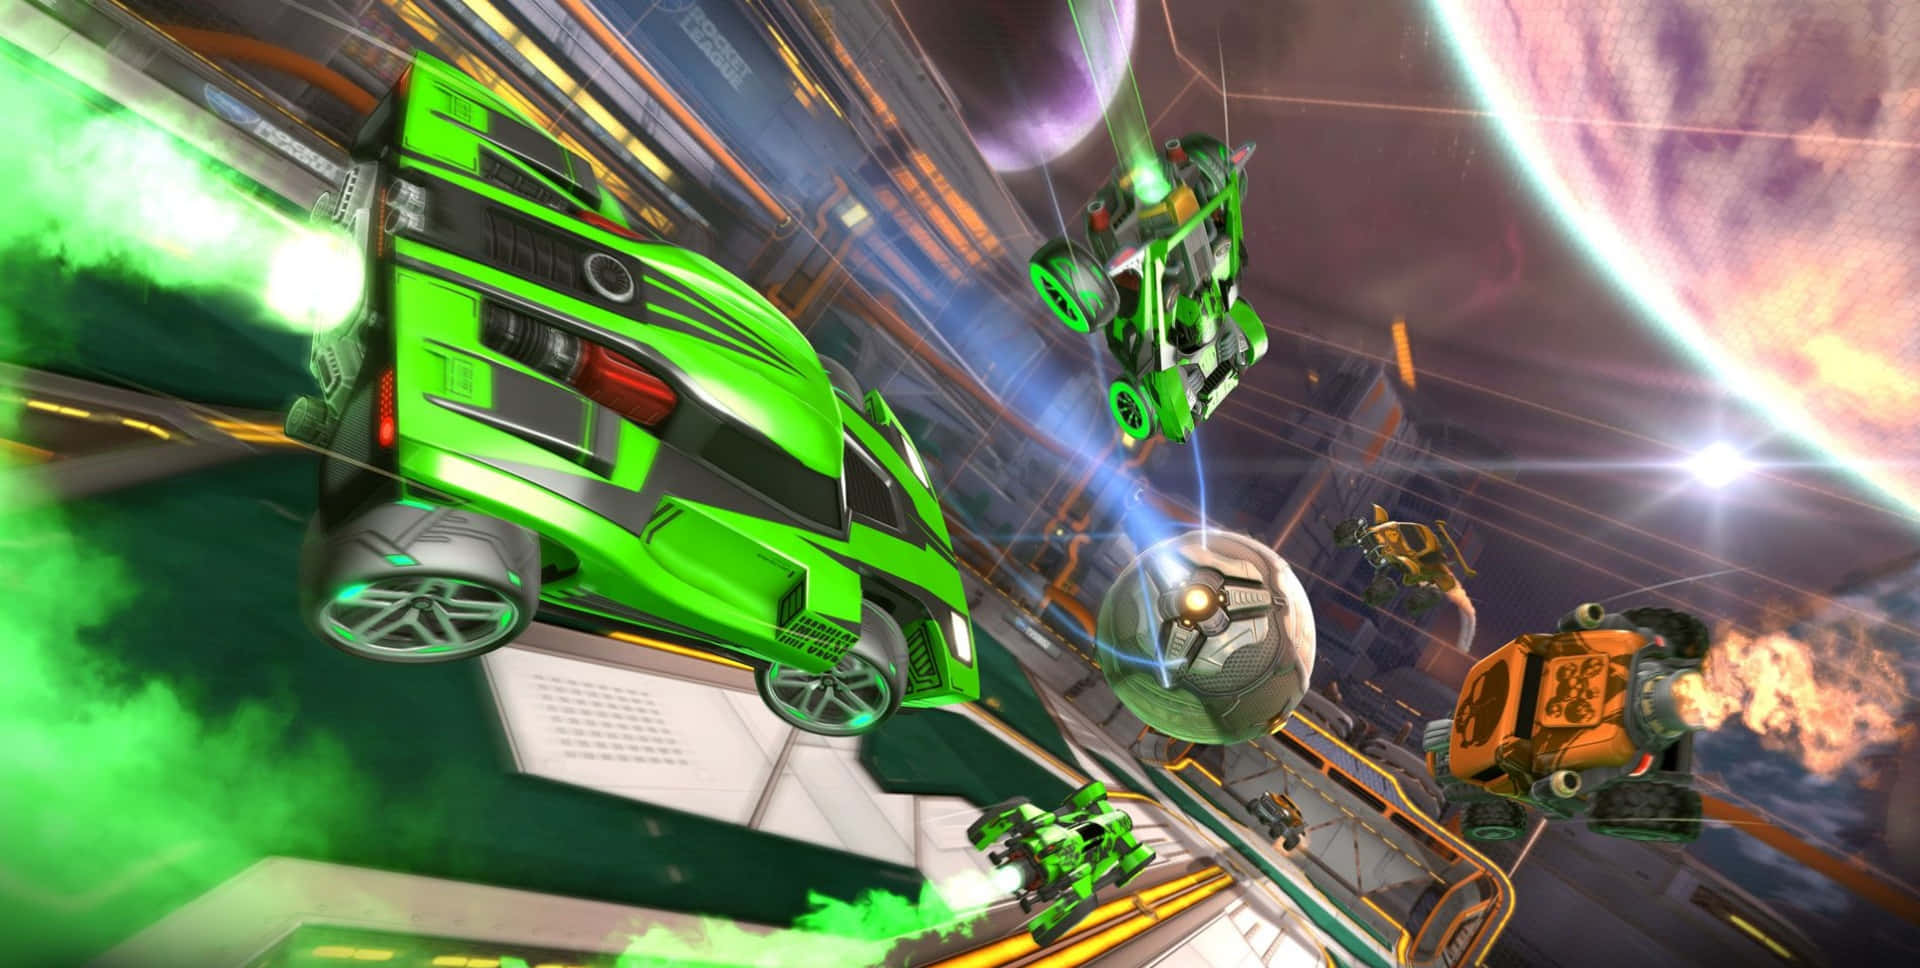 Play the rocket-charged video game, Rocket League, on your desktop Wallpaper